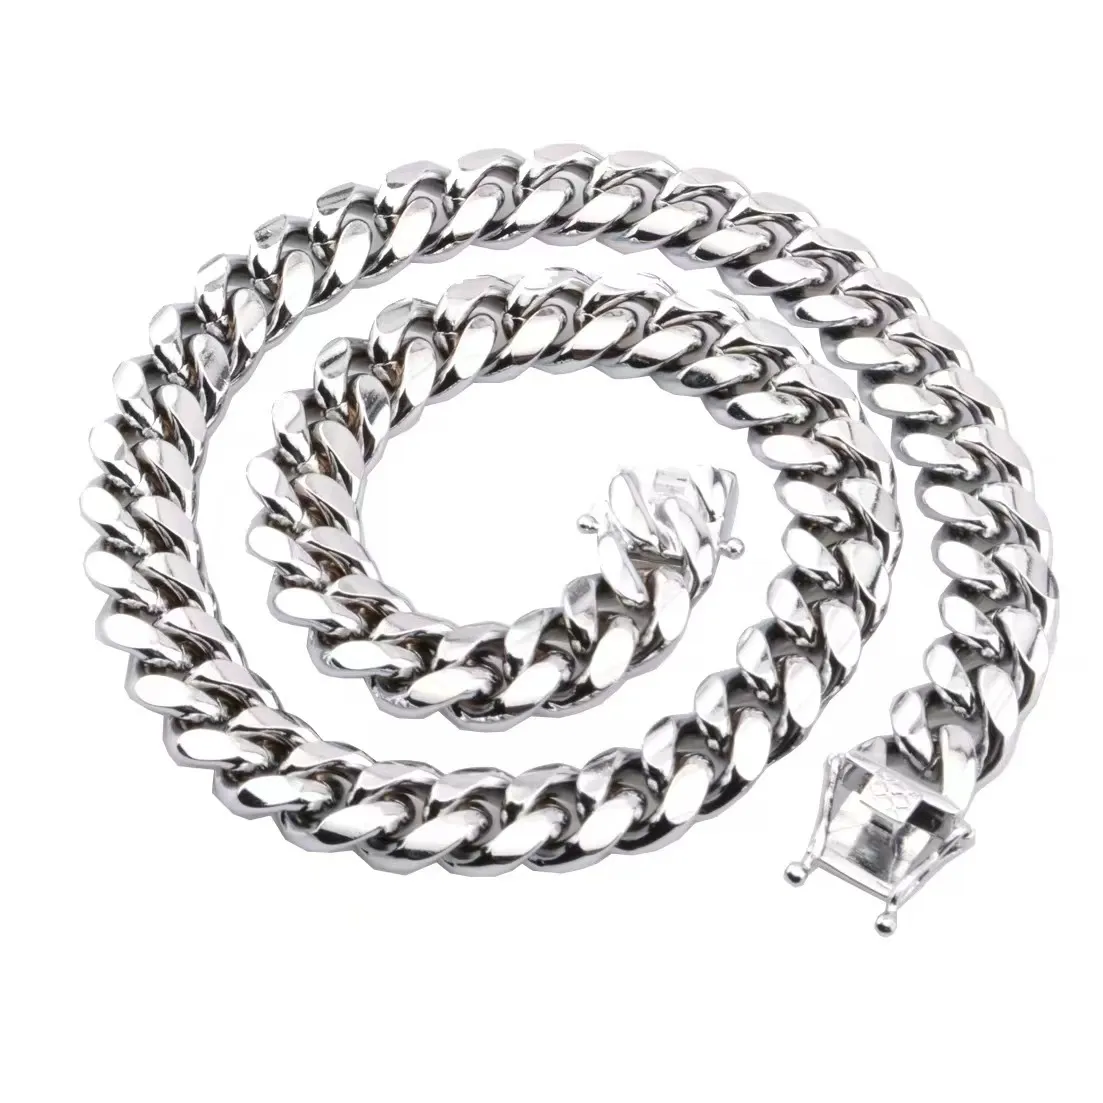 316L Stainless Steel Jewelry Gold Plated High Polished Miami Cuban Link Necklace Men Punk 16mm Curb Chain Double Safety Clasp 18inch-30inch